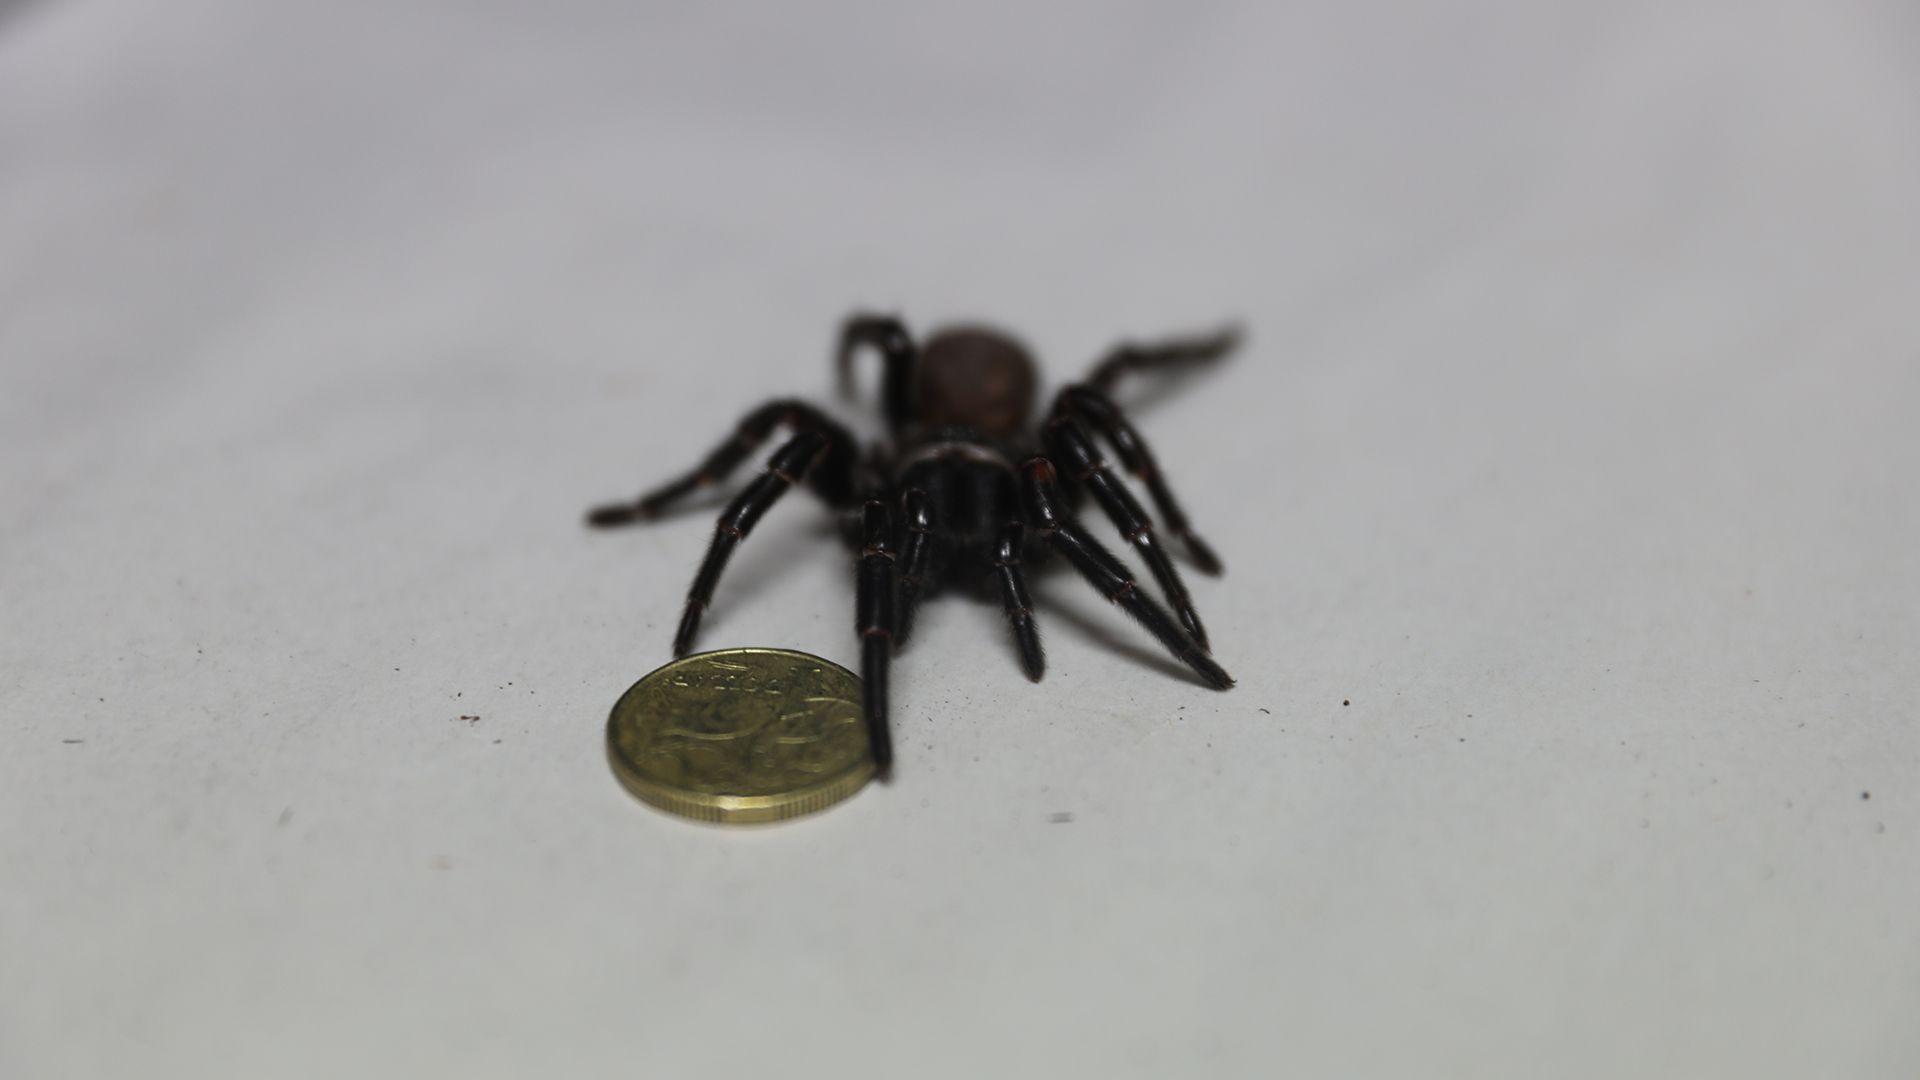 <p>                     Normally in the world of spiders it is the female that is more deadly, but for funnel-web spiders (<em>Atrax</em>) the male has the more toxic bite. Any attack must be treated quickly with antivenom, especially if a child has been bitten. There have been several recorded fatalities due to the venomous bites of the funnel-web spider, with death occurring within the hour after being bitten. However, since the development of the antivenom in 1981, there haven’t been any more recorded deaths. Predominantly located in southeast Australia (Sydney), funnel-web spiders are also found in New Zealand, Chile and Europe.                   </p>                                      <p>                     Interestingly, animals such as cats and dogs can actually survive a funnel web bite – it takes about 30 minutes for their body to neutralize the toxin – it's just humans who have such a severe reaction. This venom effects the nervous system and causes symptoms such as an elevated heart rate, numbness/tingling of the mouth and difficulty breathing.                   </p>